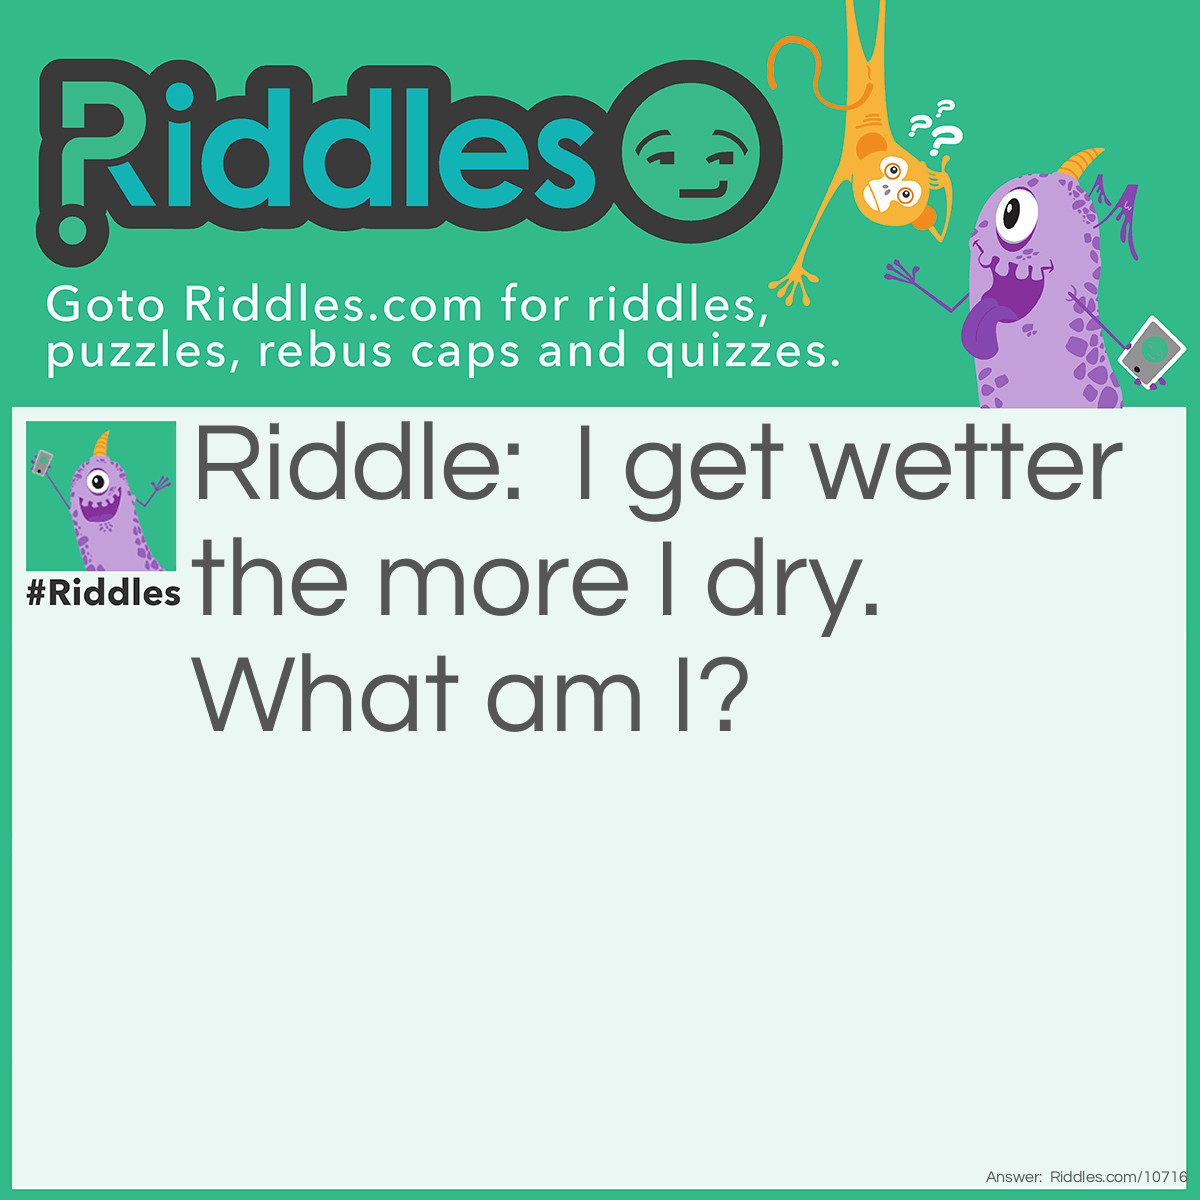 Riddle: I get wetter the more I dry. What am I? Answer: A towel.